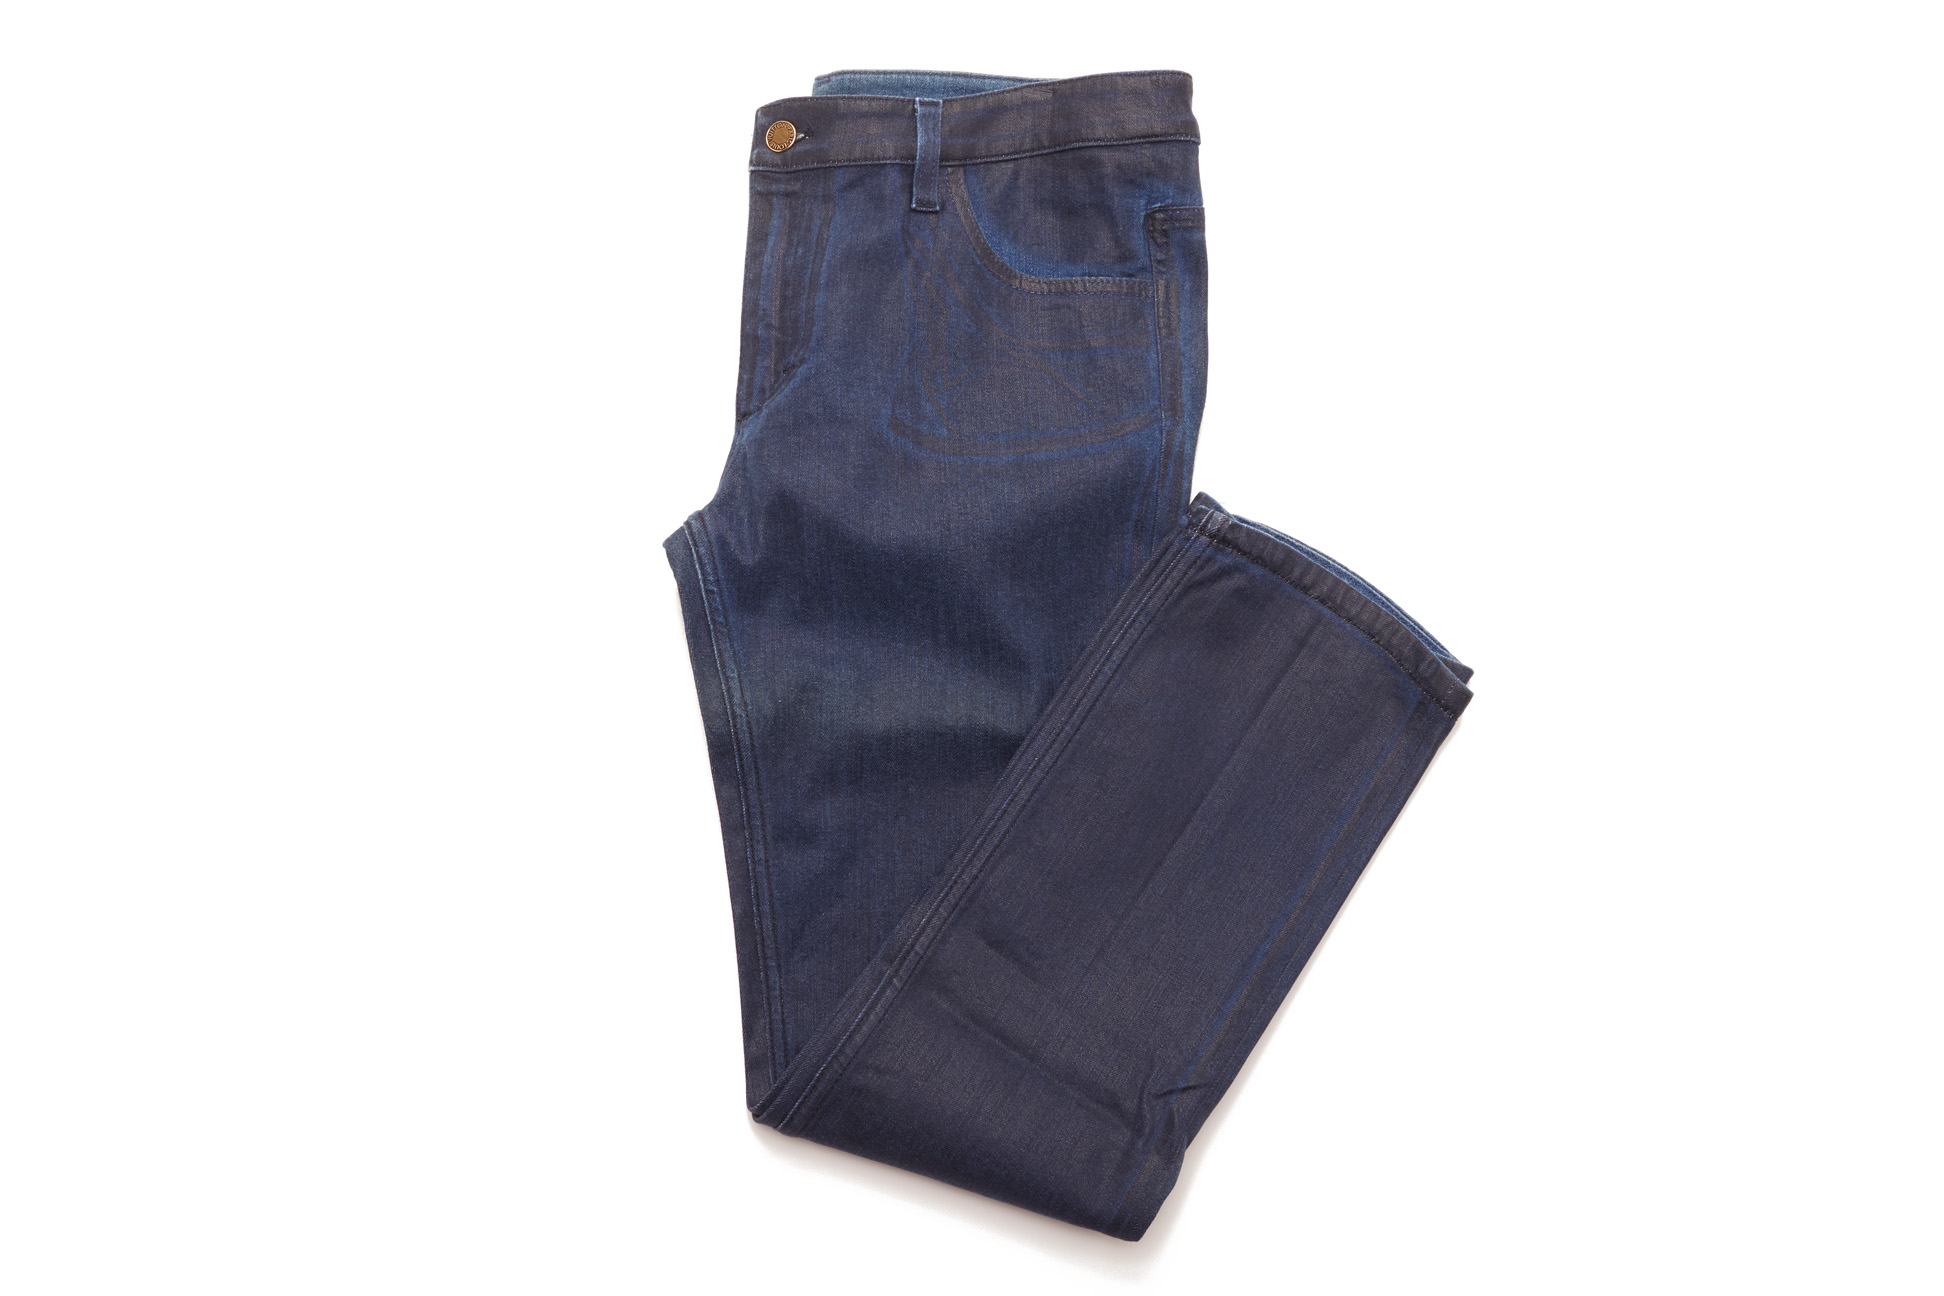 A PAIR OF LOUIS VUITTON NAVY JEANS